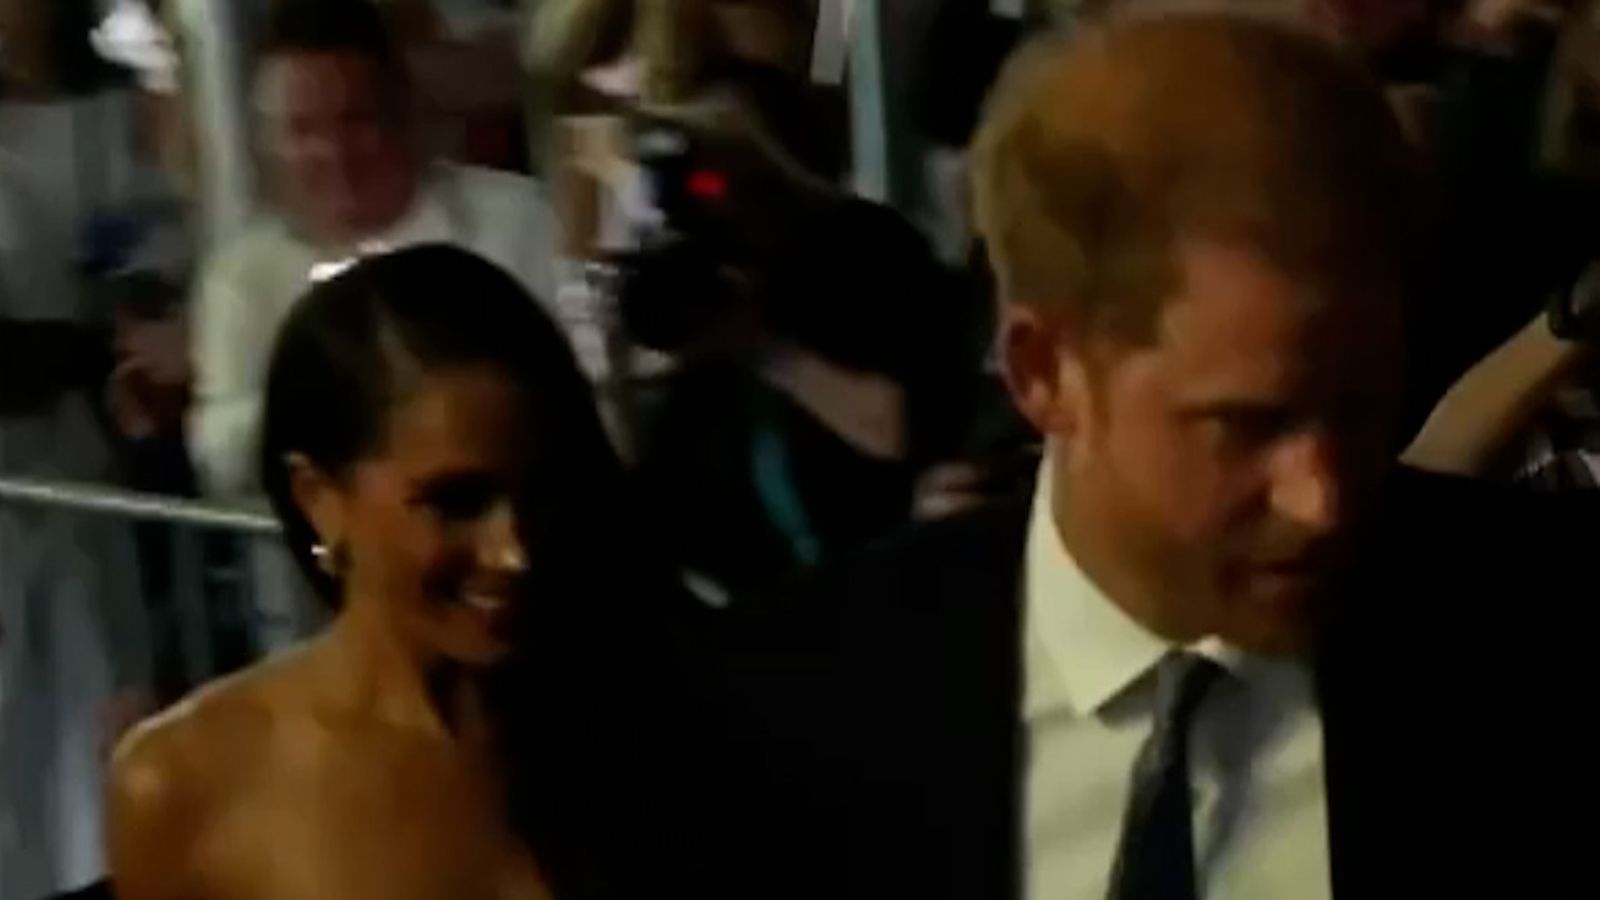 Harry and Meghan demand photos from paparazzi 'chase' - but agency refuses